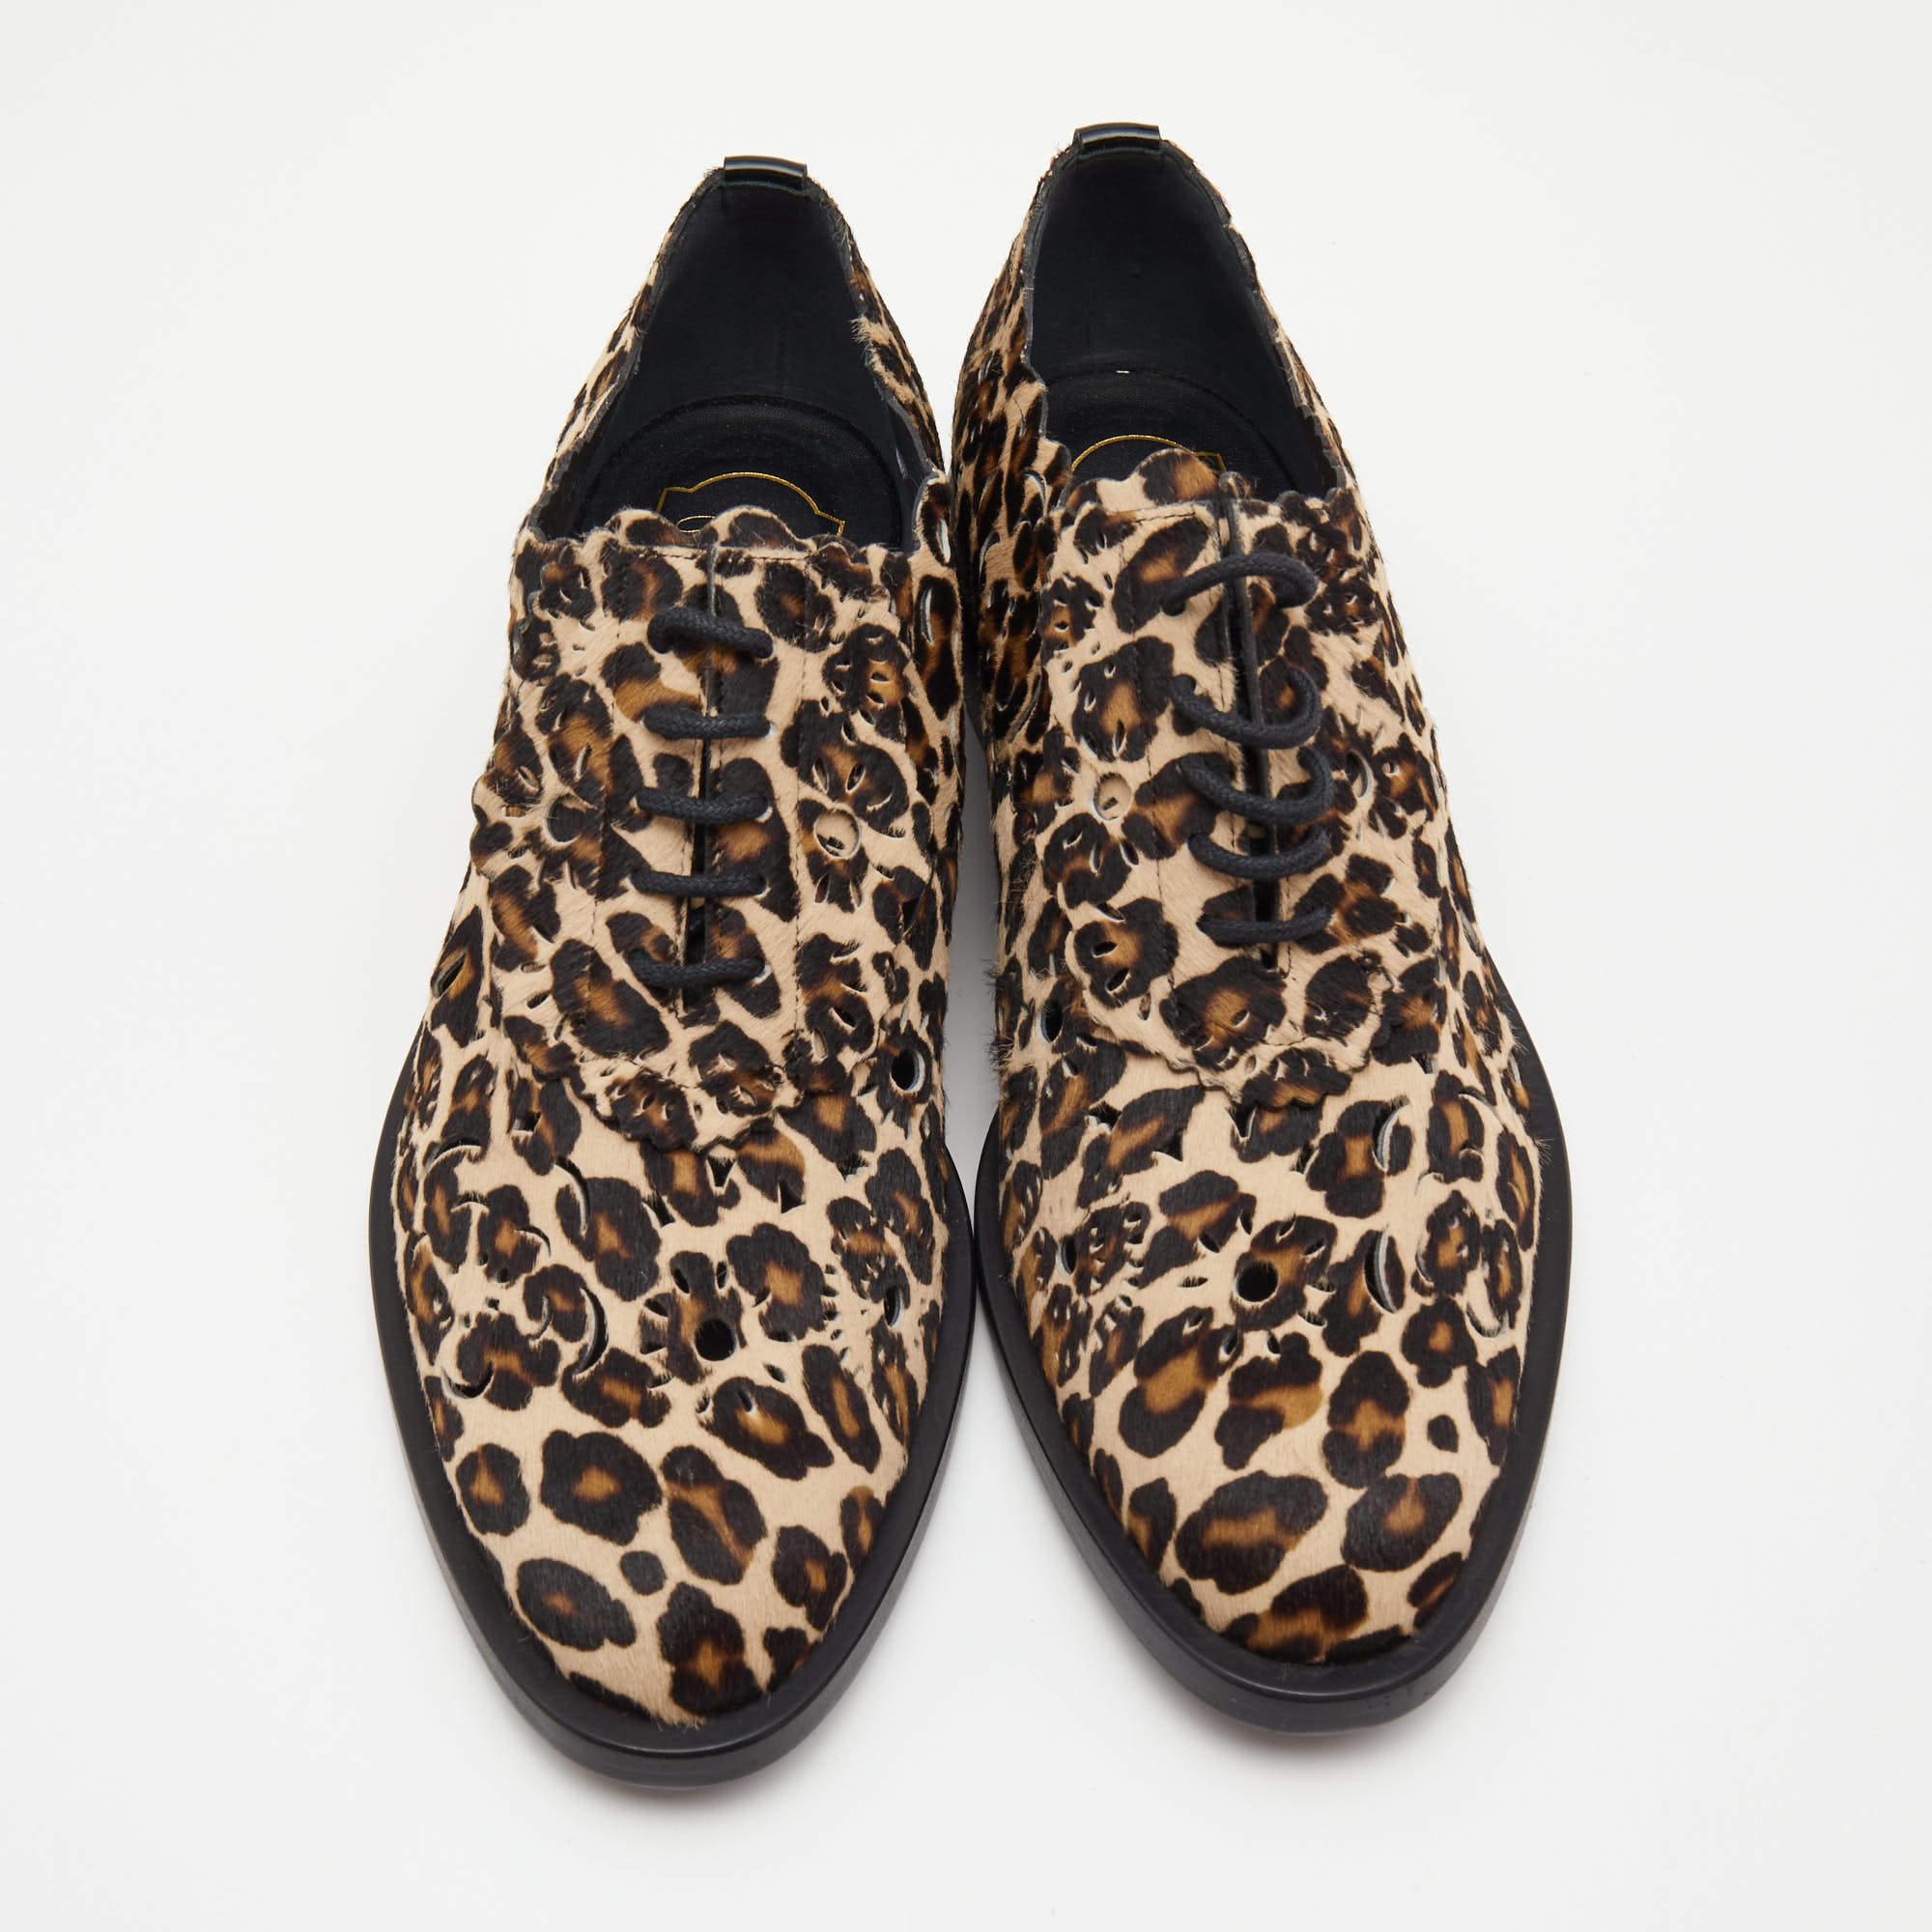 Look exemplary as you style these Oxfords from Roger Vivier with your attire. They are created using beige-brown leopard-printed calf hair and feature laser-cut detailing, lace-ups on the vamps, and a sturdy shape. Treat your feet to this fabulous